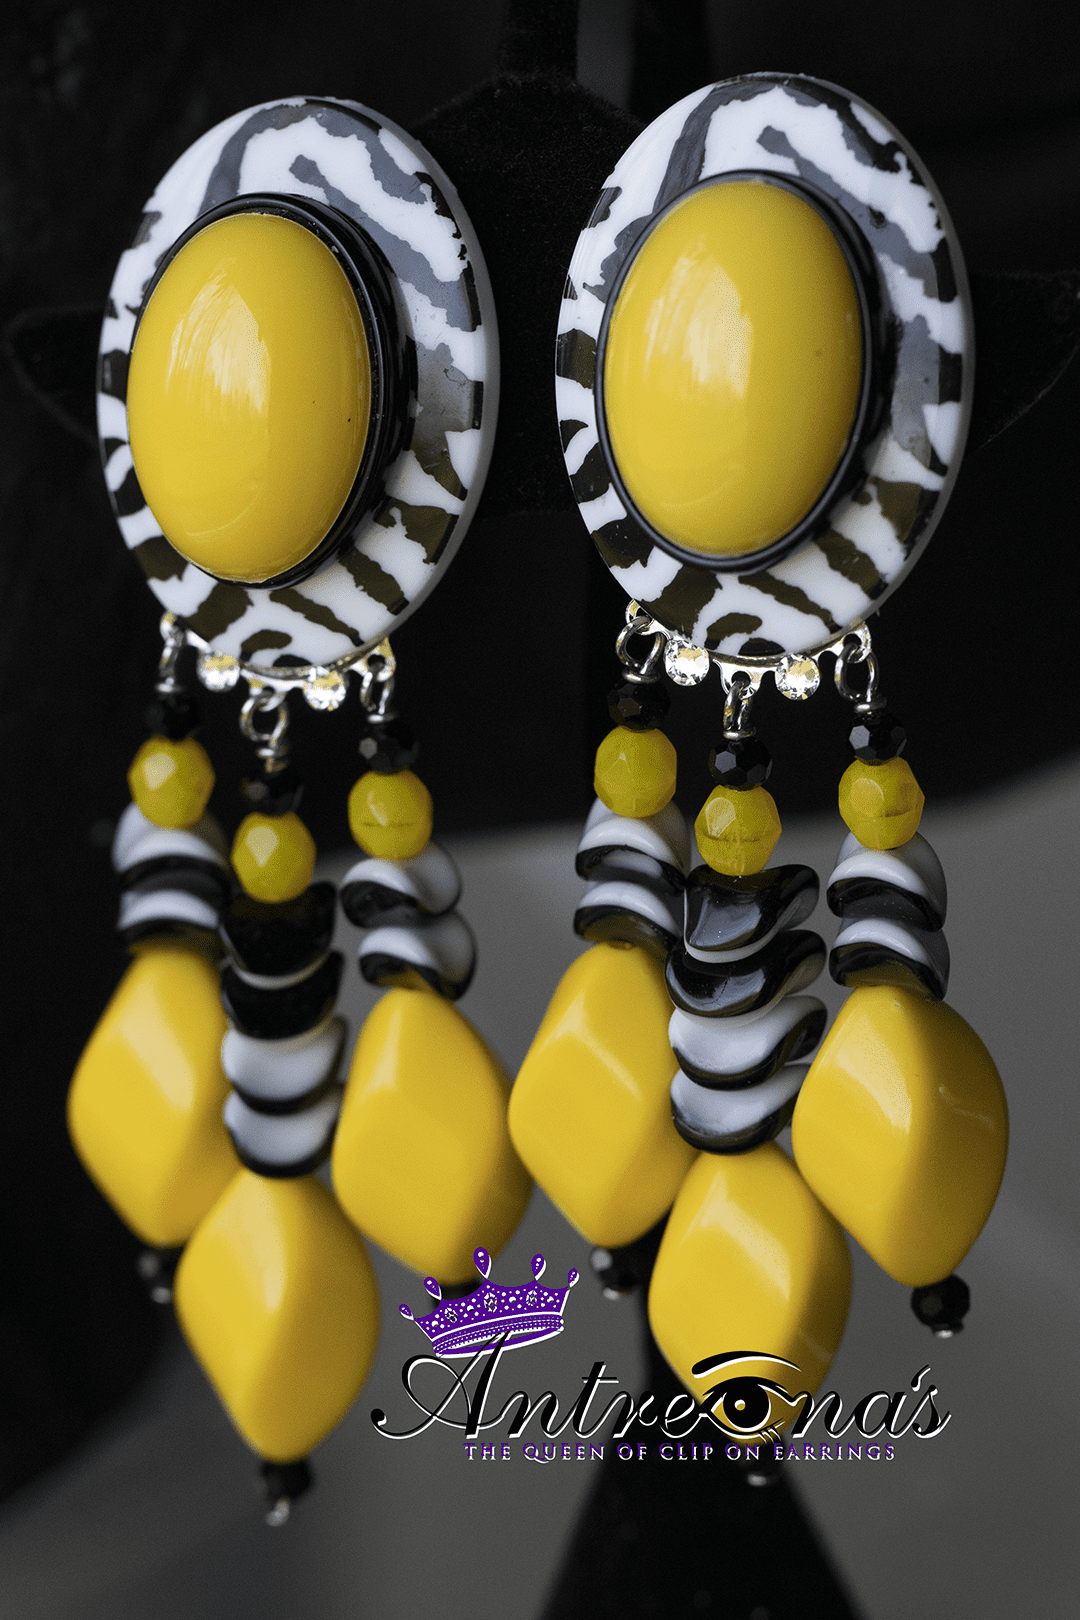 Un-Pierced Yellow Black White Comfy Pain-Free Earrings. Designed with three great color combinations to choose to wear with solids or multi prints